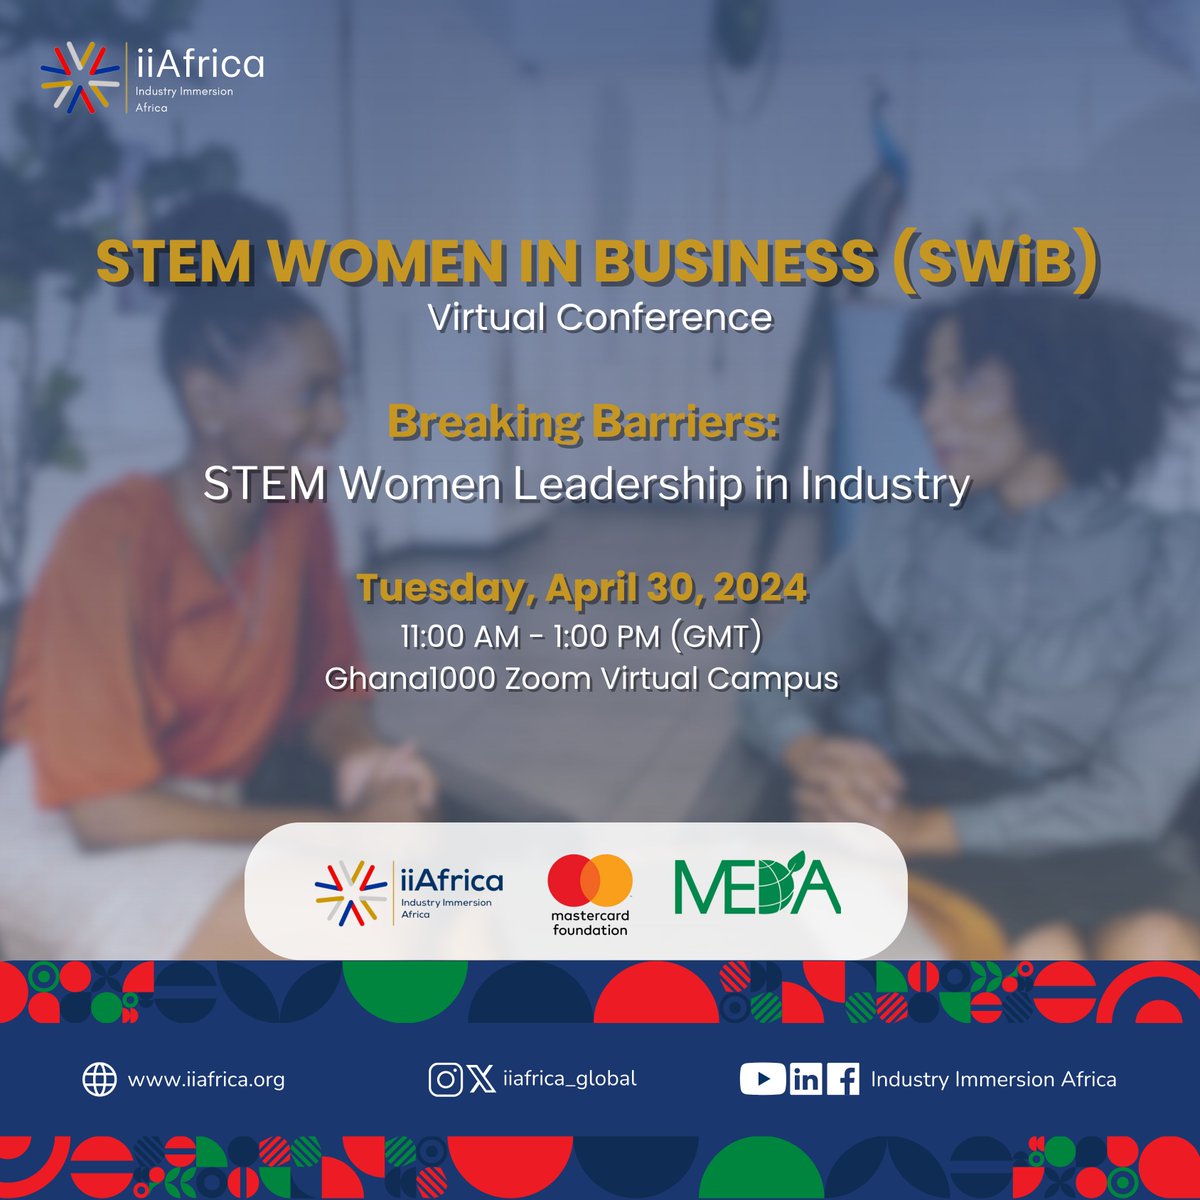 According to @AfDB_Group, women are under-represented in STEM fields across Africa where pay is generally better than in non-STEM jobs. Encouraging women into STEM fields can reduce skill shortages and improve economic empowerment while plunging them into the formal economy.

1/2